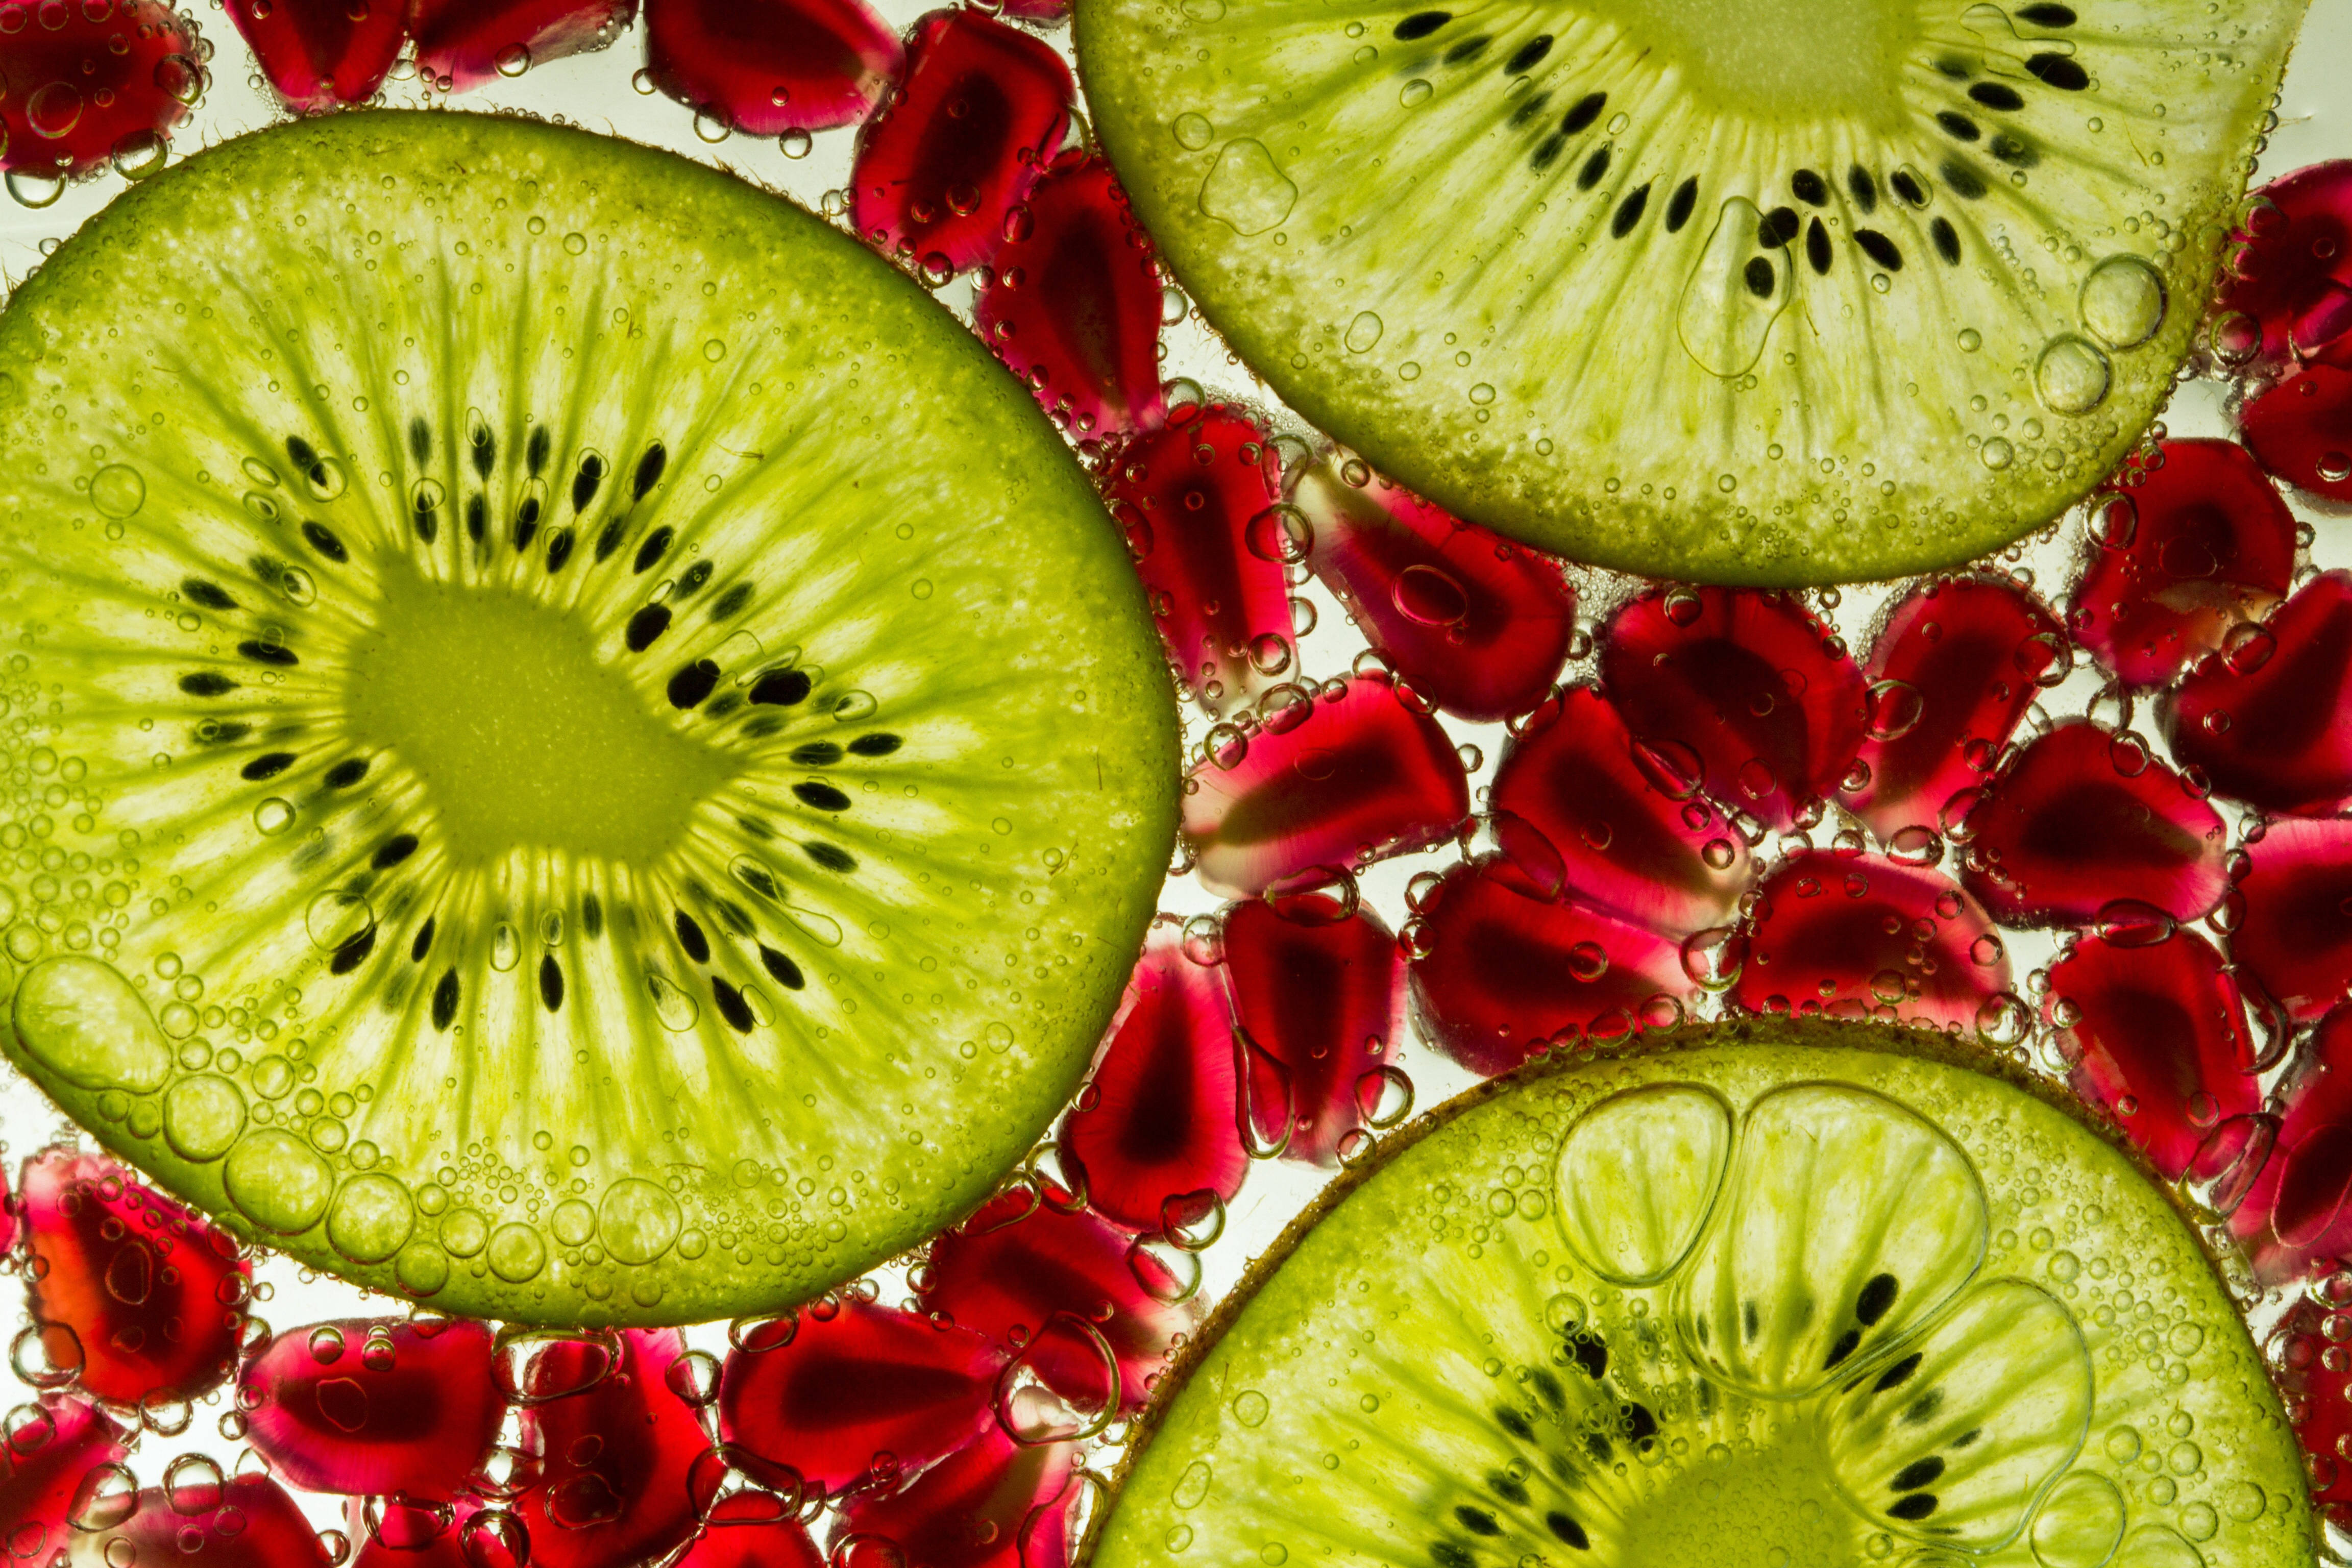 A Fascinating Macro Photography Image Of Red Translucent Pomegranate Seeds In The Spaces Between Three Slices Of The Kiwi Fruit Backlit From A White Surface